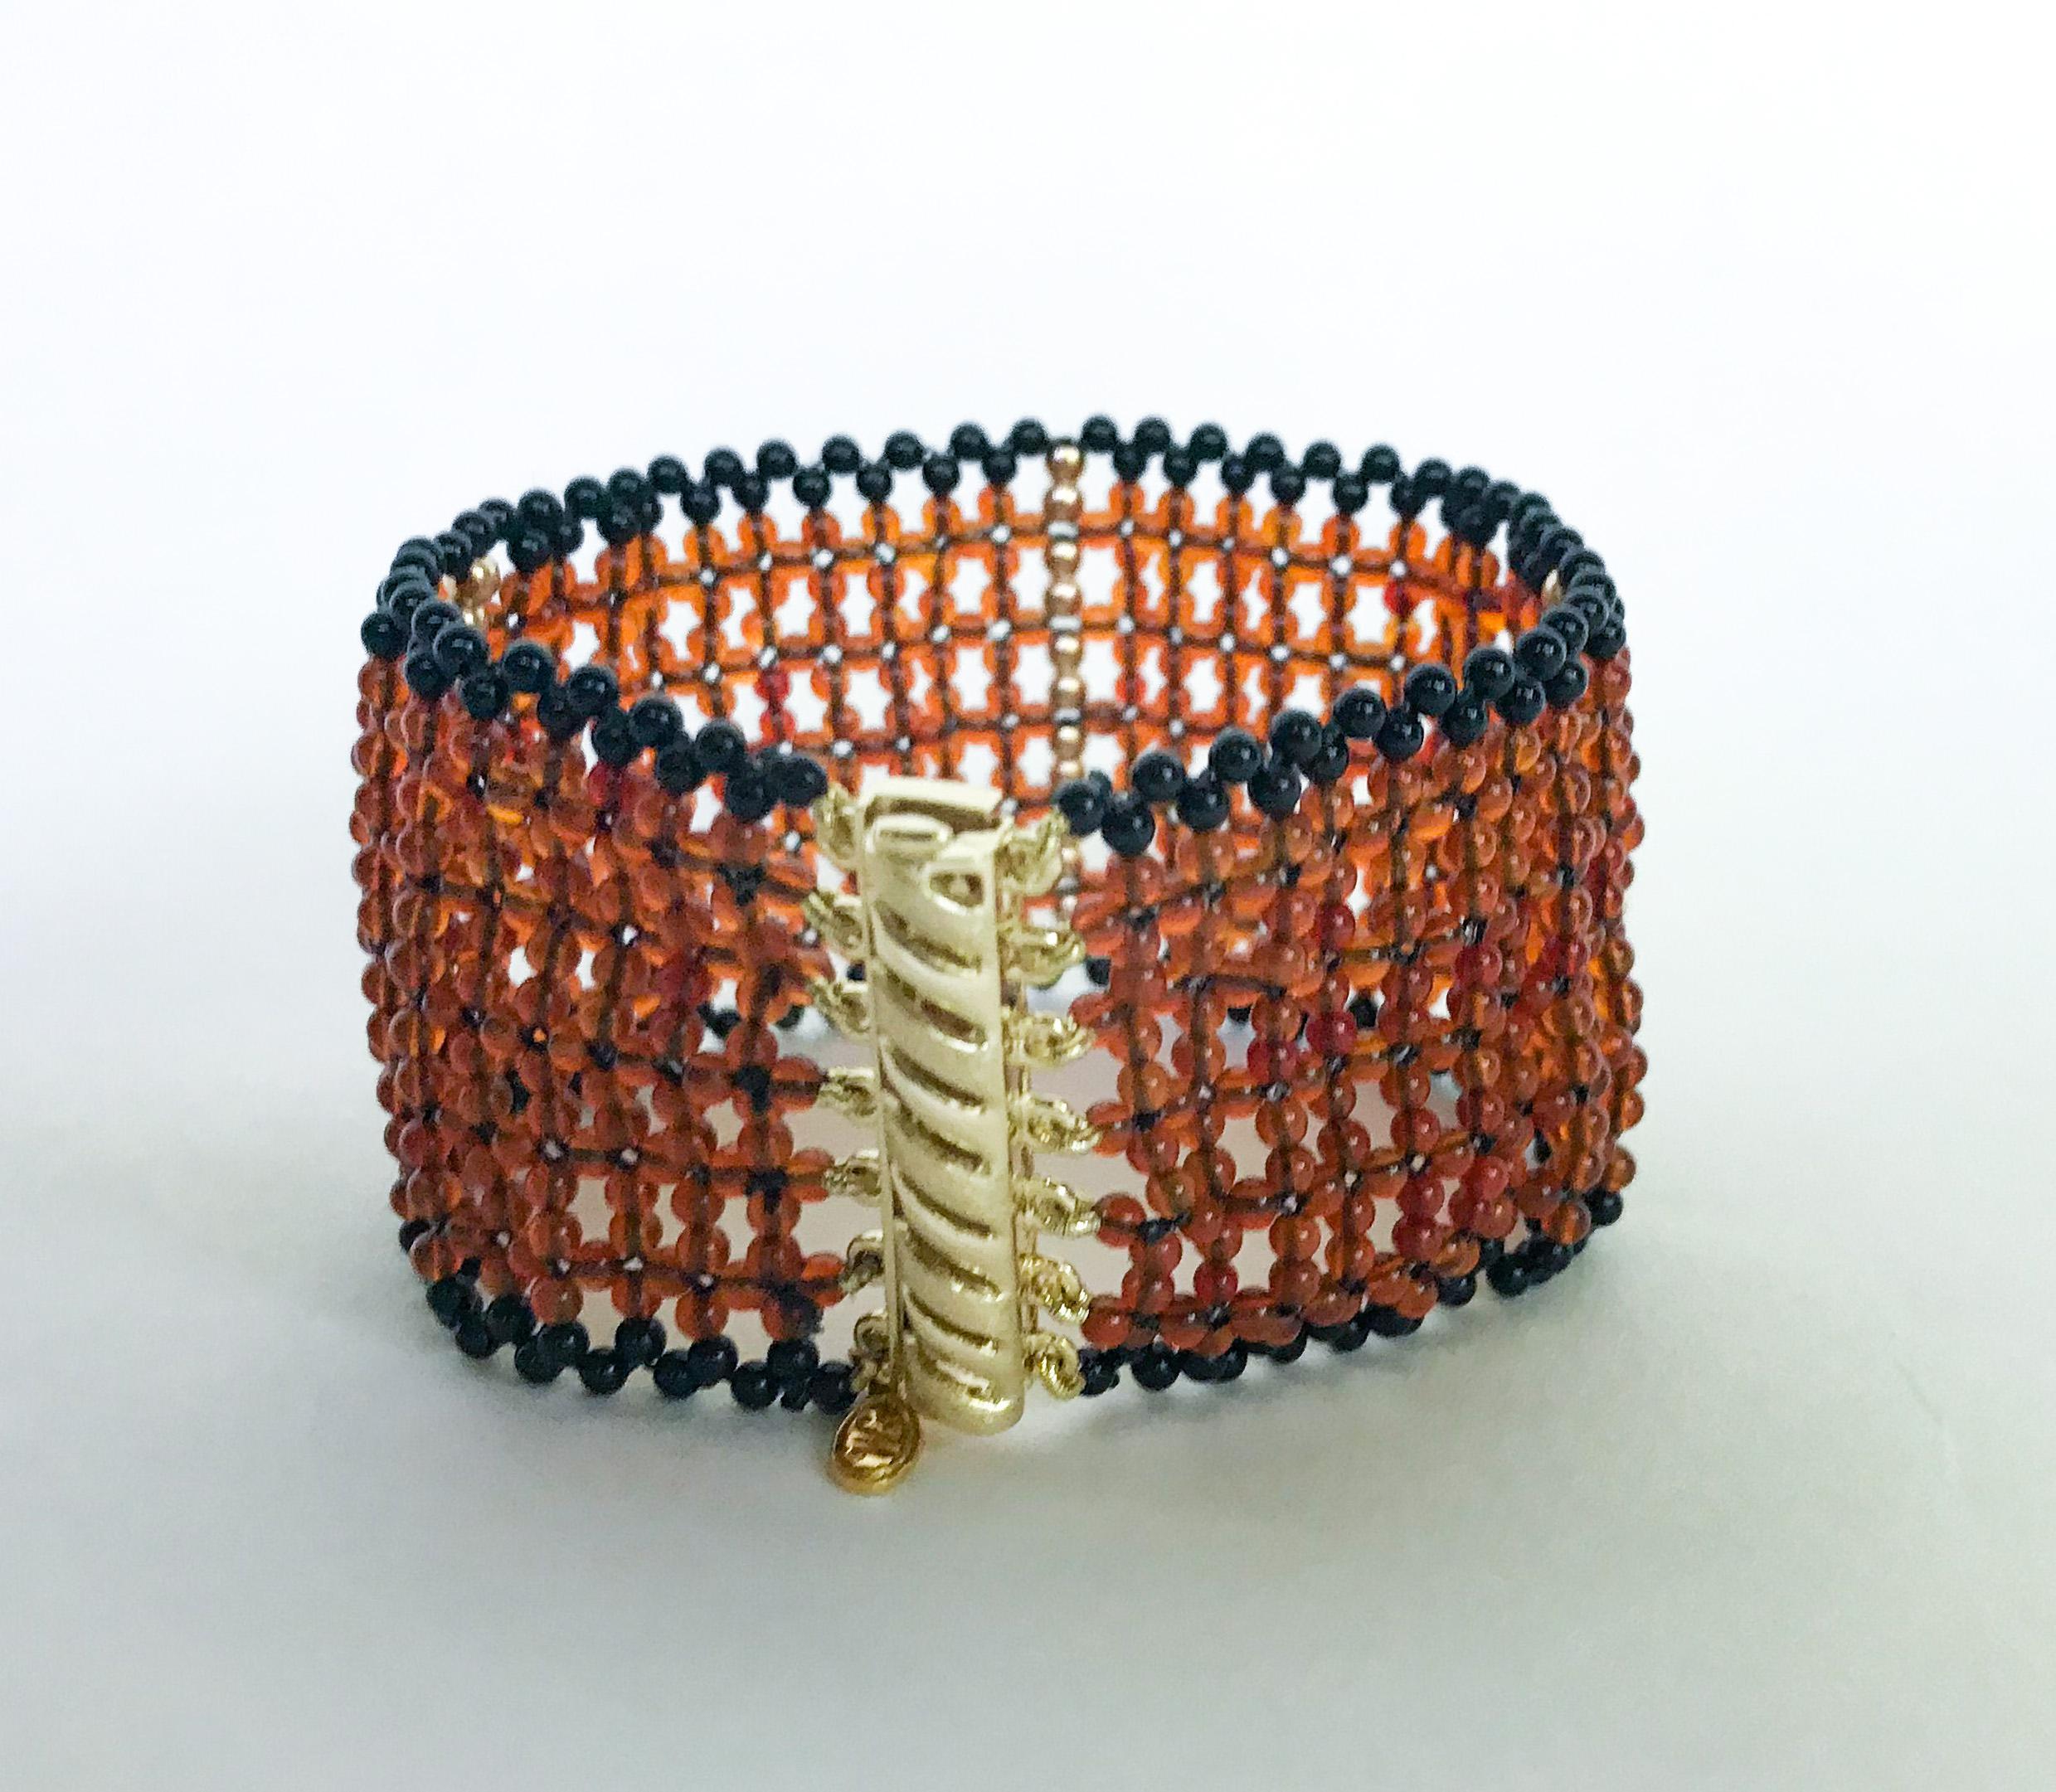 This unique bracelet is 6.5 inches long and 1.25 inches wide. It is made with 1.5 mm carnelian, onyx beads , and 14k gold beads that are 2 mm. The clasp is sterling silver and 14k gold-plated, and very secure and easy to use. The bracelet is woven